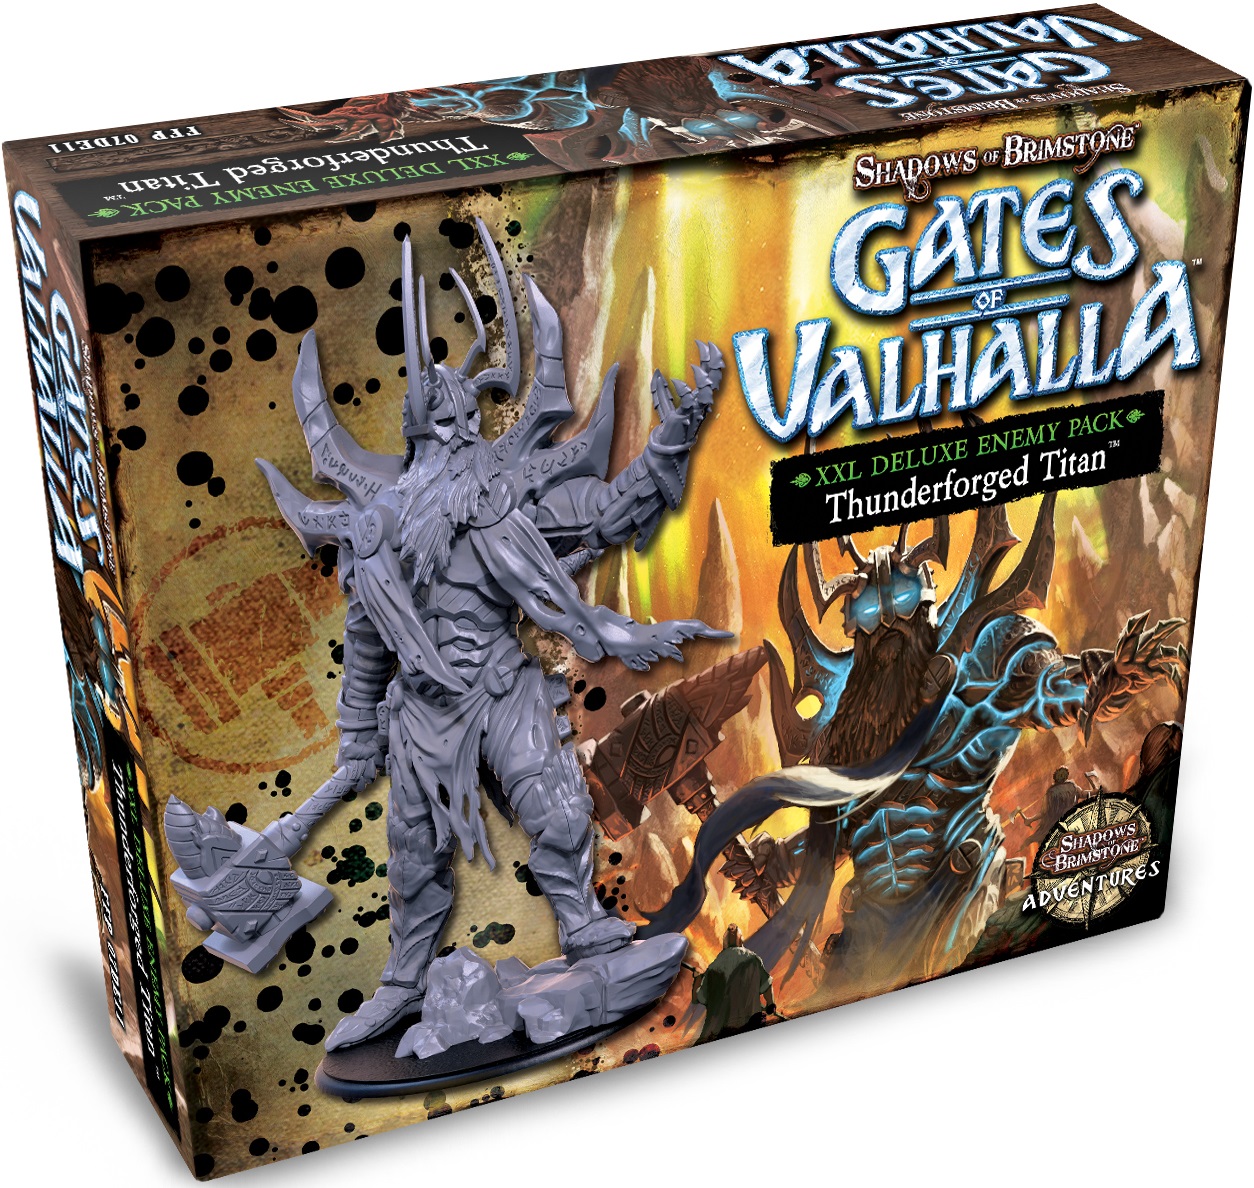 Shadows of Brimstone: Gates of Valhalla: Thunderforged Titan (Deluxe Enemy Pack) 